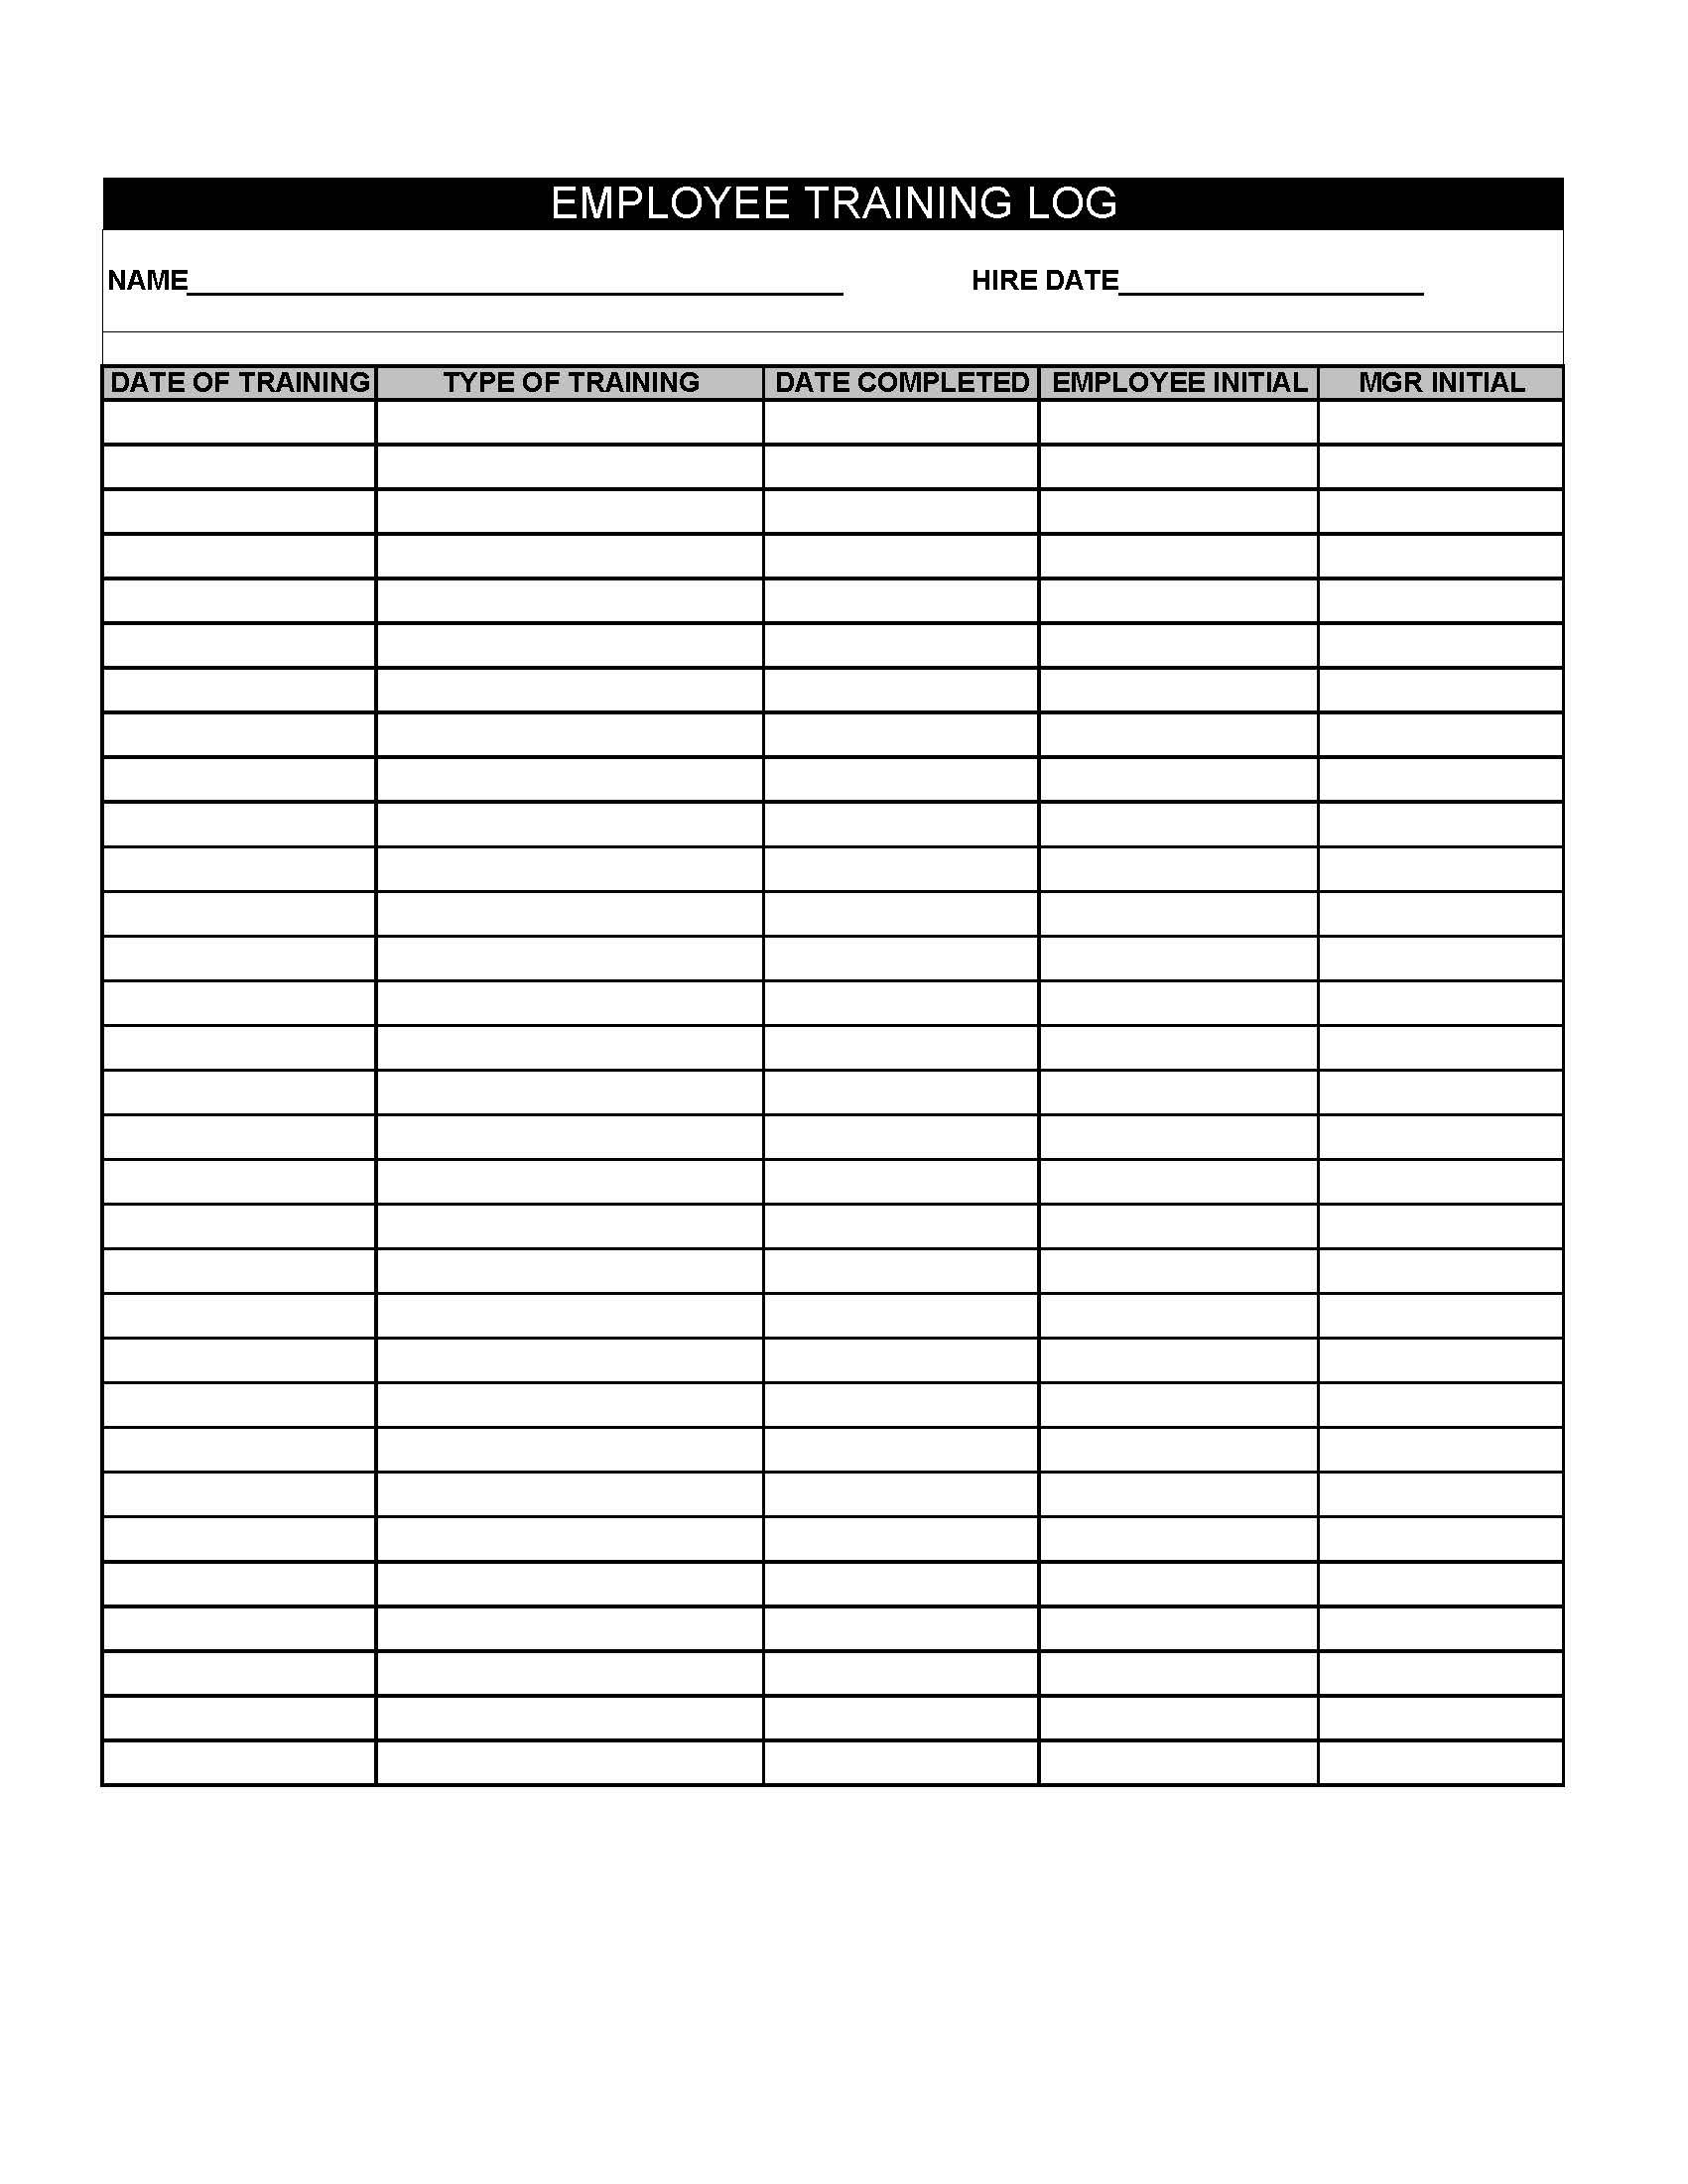 Printable Employee Training Log Template Excel In Employee Training Log Template Excel Download For Free